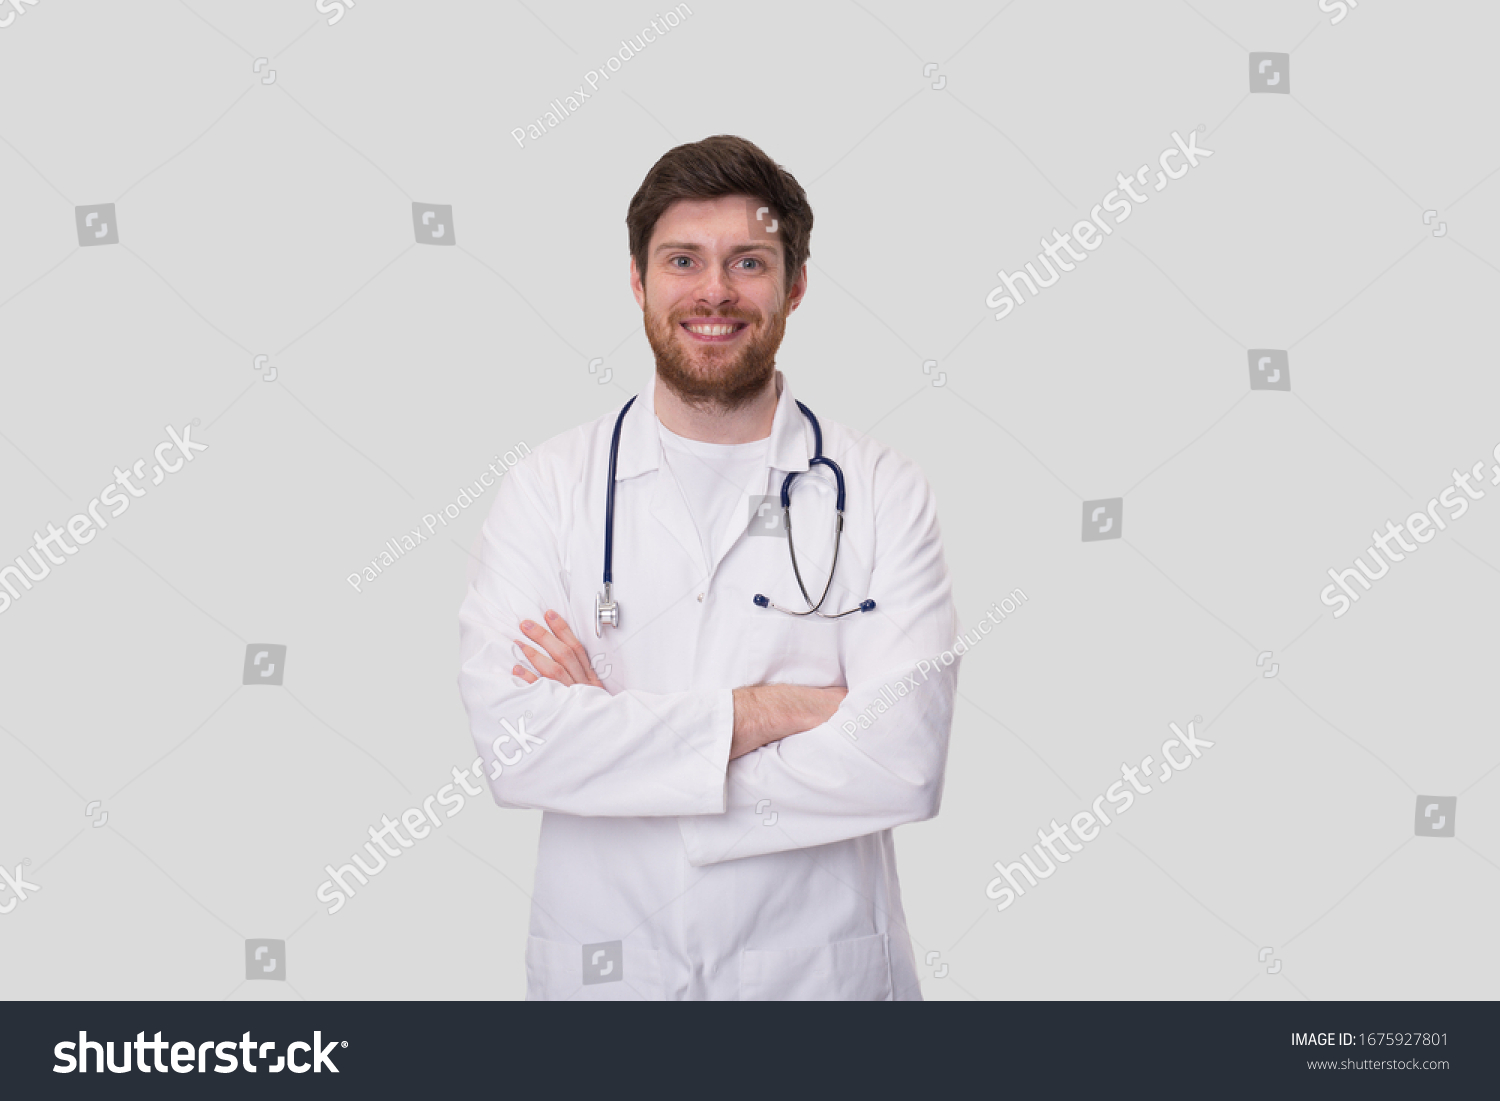 Man Doctor Smiling Hands Crossed Isolated #1675927801